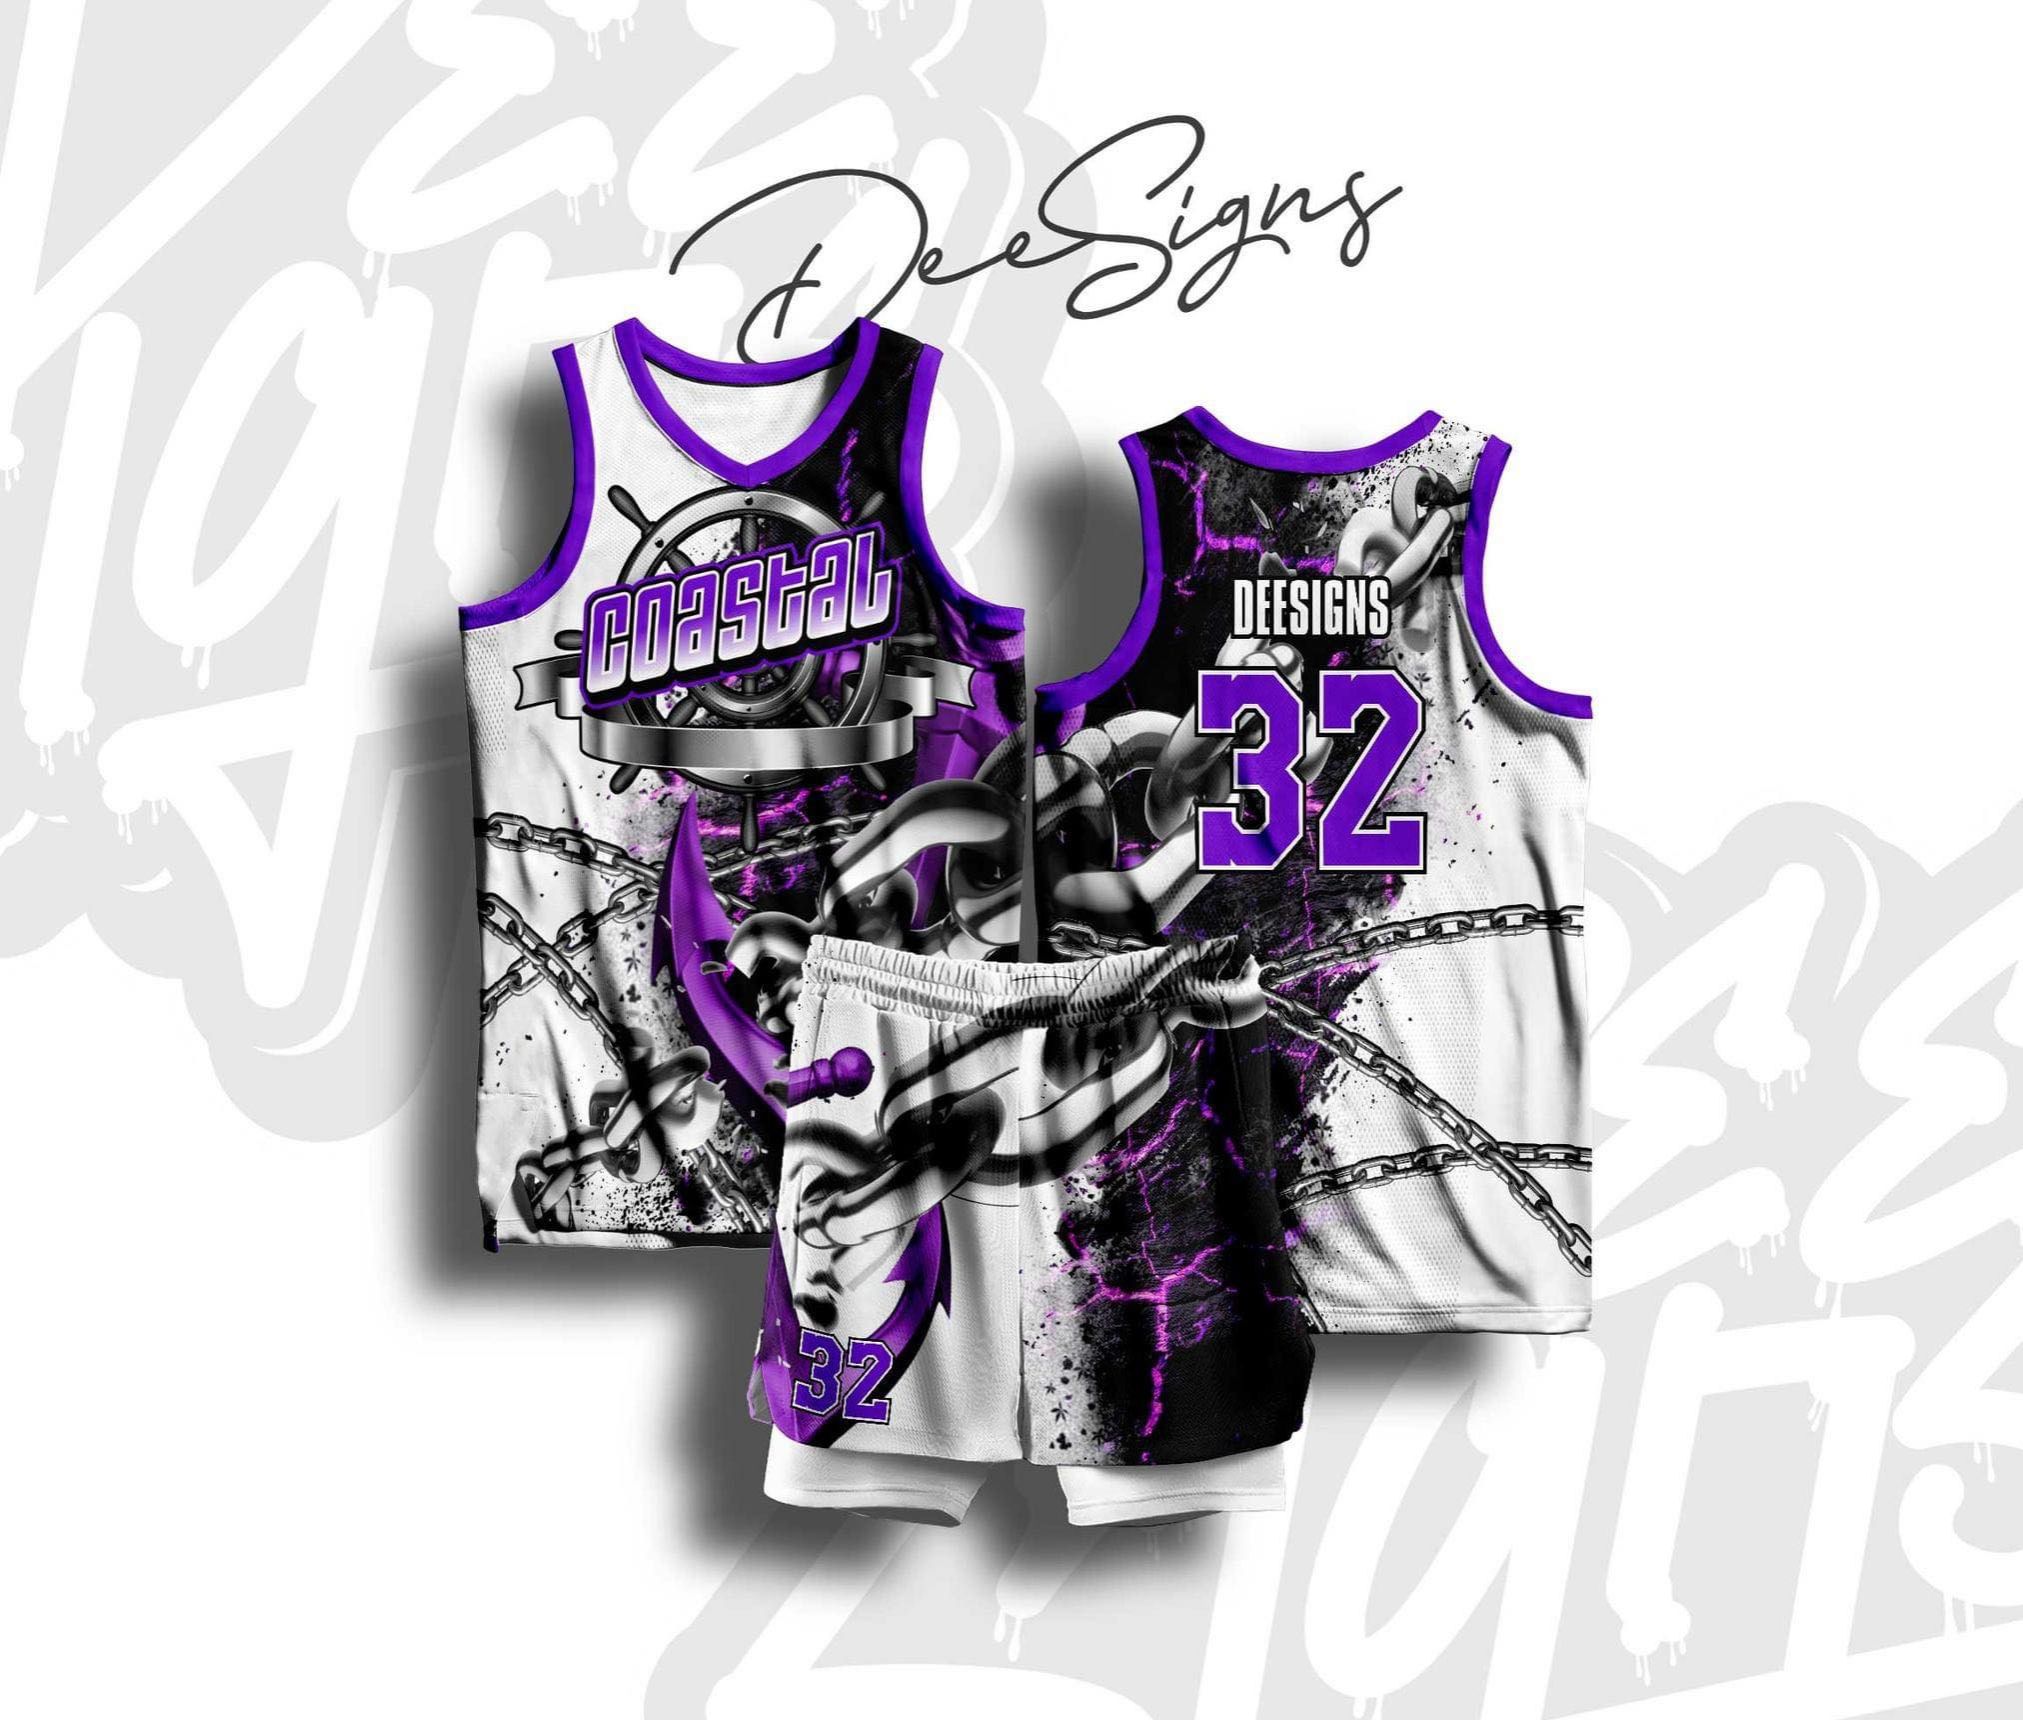 Graphicstreet - SOUTH STAR AERPACK FULL SUBLIMATION JERSEY BASKETBALL  UNIFORM Full sublimation affordable high quality #Graphicstreet #jersey # Seafarer #SeafarersPH #seafarerday #basketballuniform #Basketball  #volleyball #longsleevetee #officeuniforms